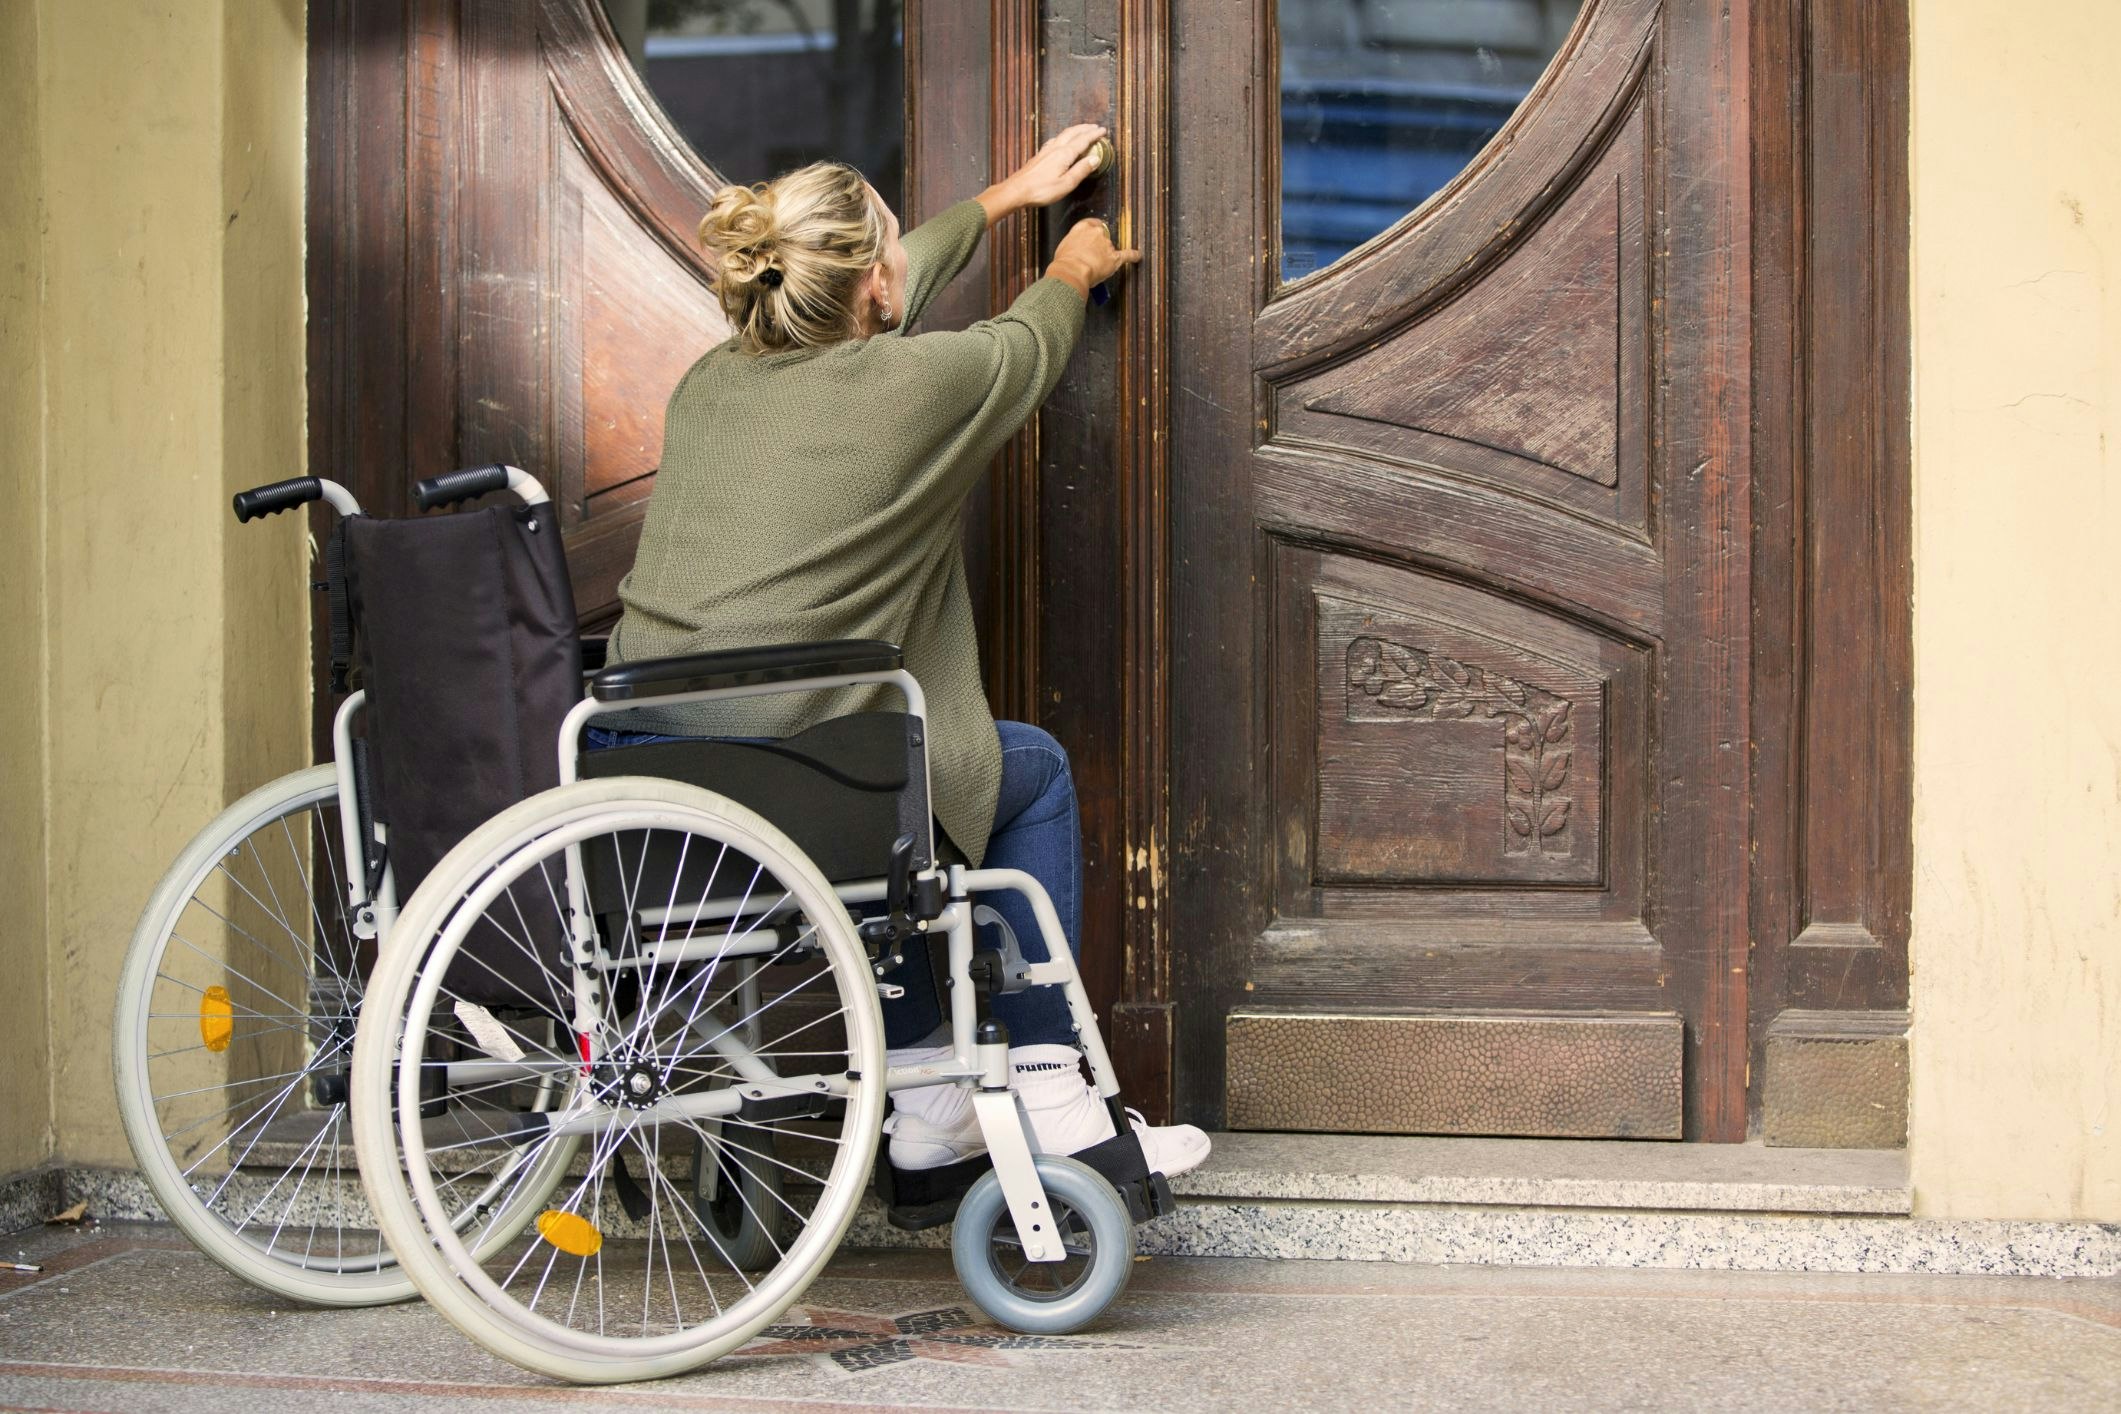 While a couple of steps to the house or a smaller bathroom might not seem problematic, such housing layouts can pose great challenges for people with accessibility requirements. [Source: Shutterstock]
